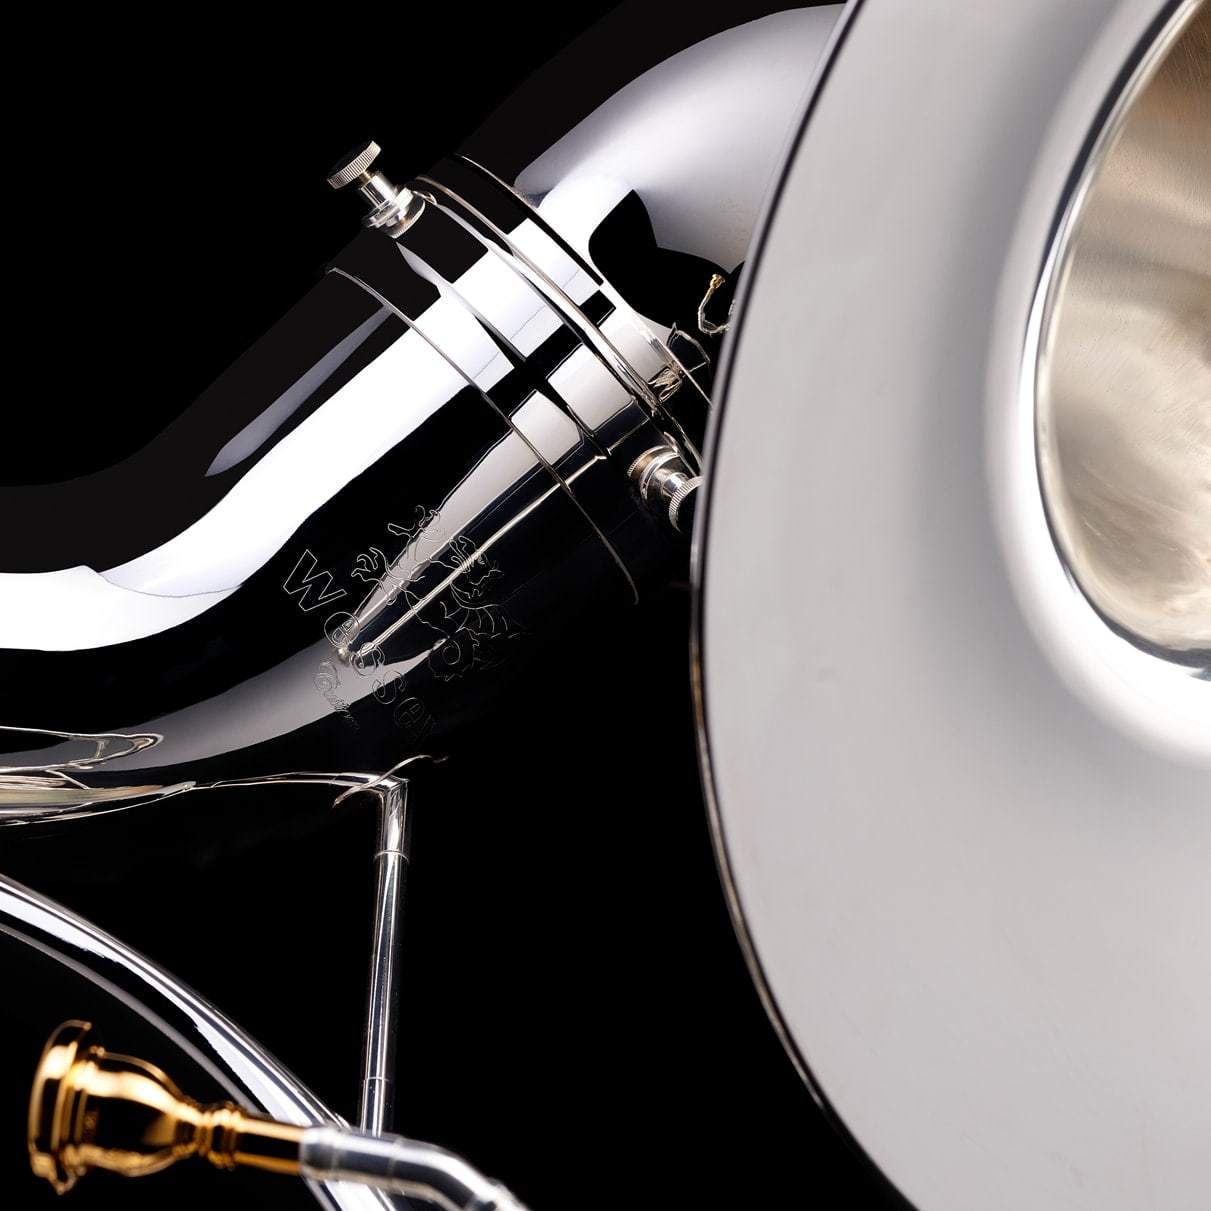 A close up image of the engraving on, and mouthpiece of, a Eb Sousaphone (4-valve) from Wessex Tubas